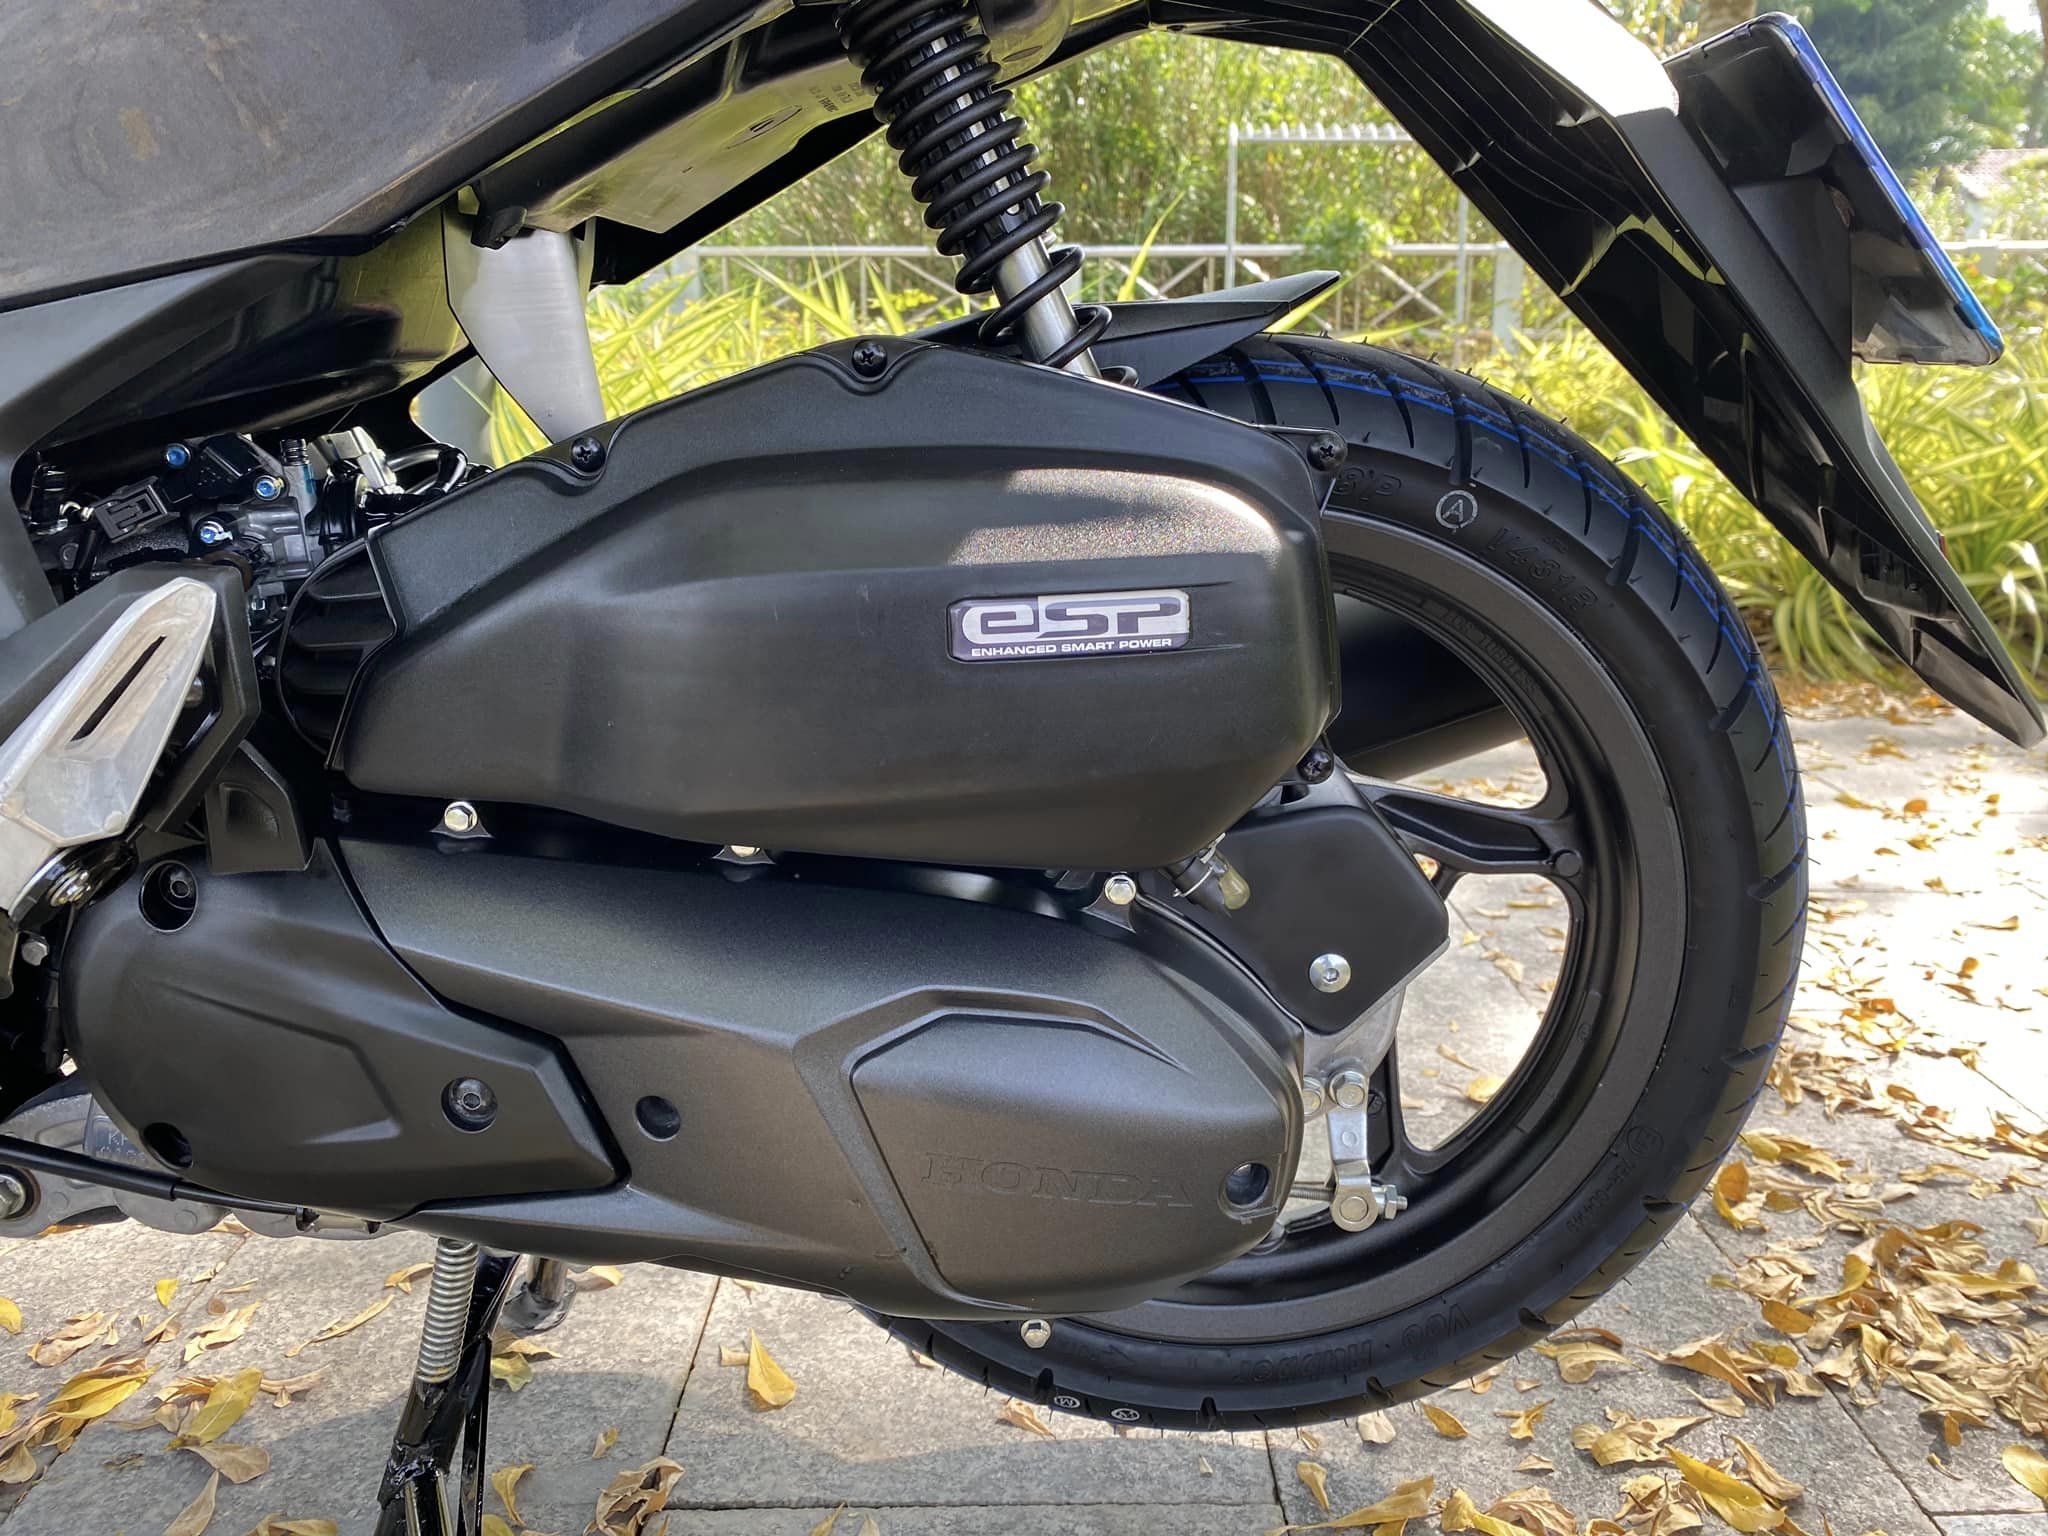 AIRBLADE 150 (2021) ABS